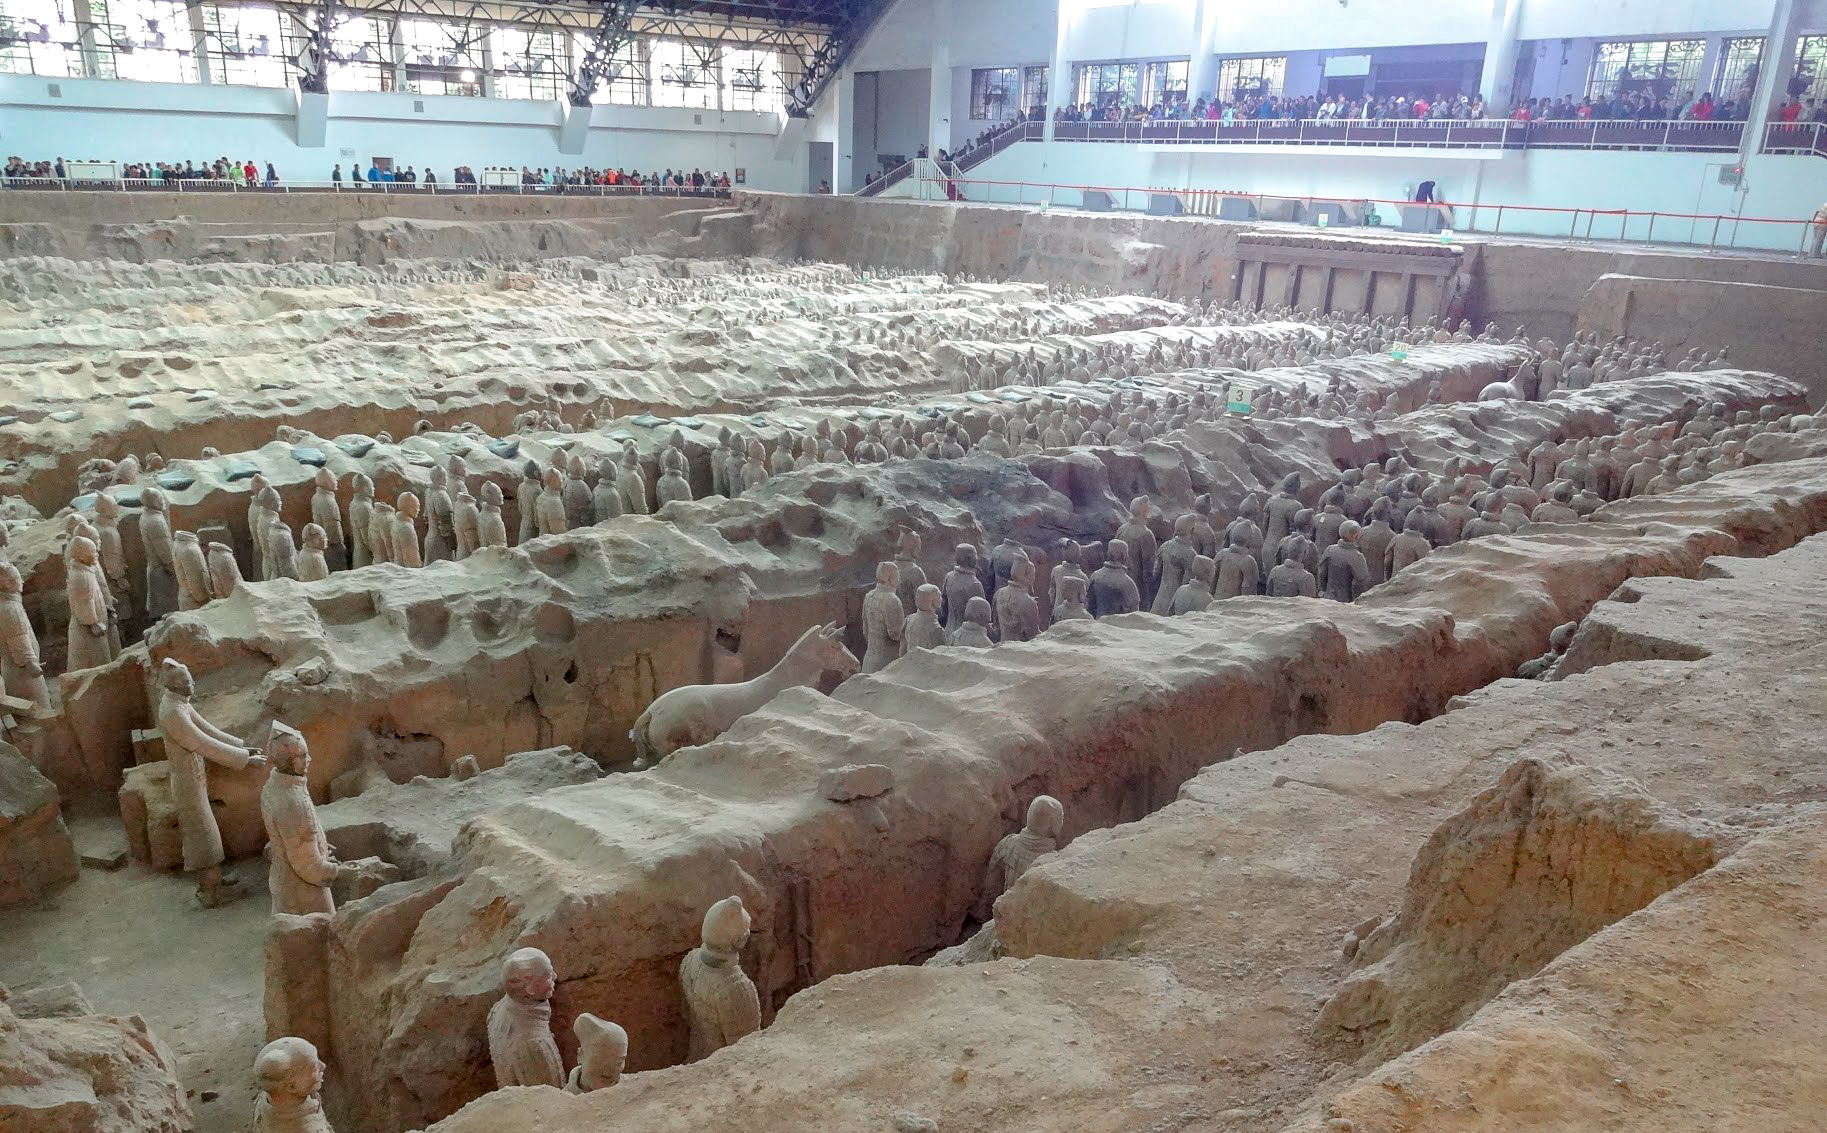 A long view of the back of the Terracotta Warriors of the Terracotta Army inside Pit 1 at Emperor Qinshihuang's Mausoleum, Xian, China